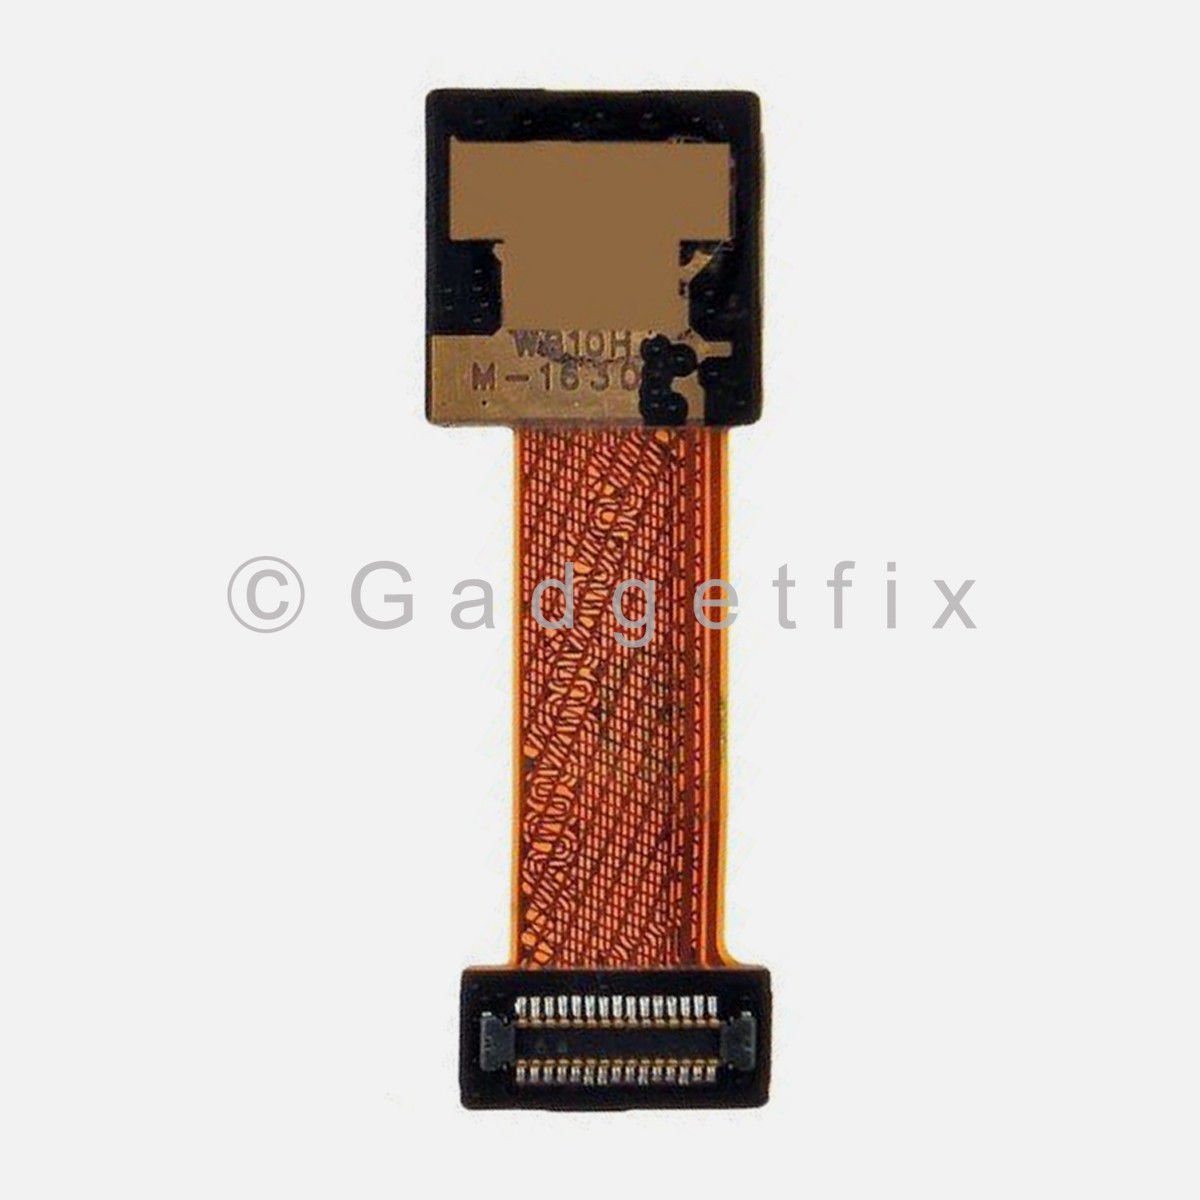 5MP Face Facing Front Camera Lens Replacement Parts for Google Pixel XL 5.5"